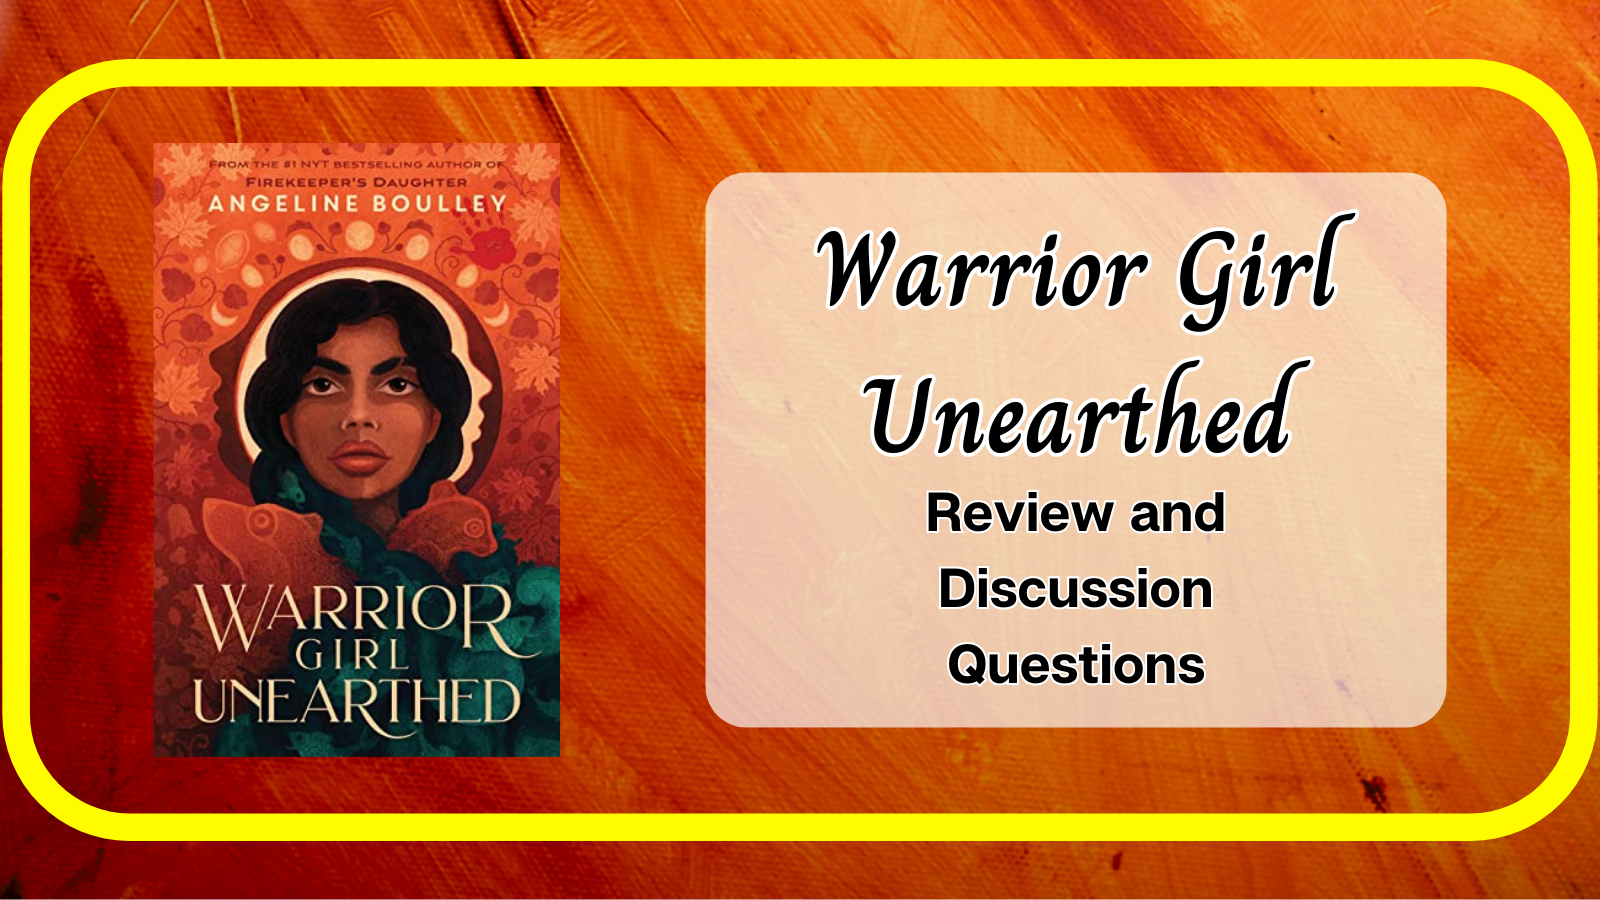 Warrior Girl Unearthed Review